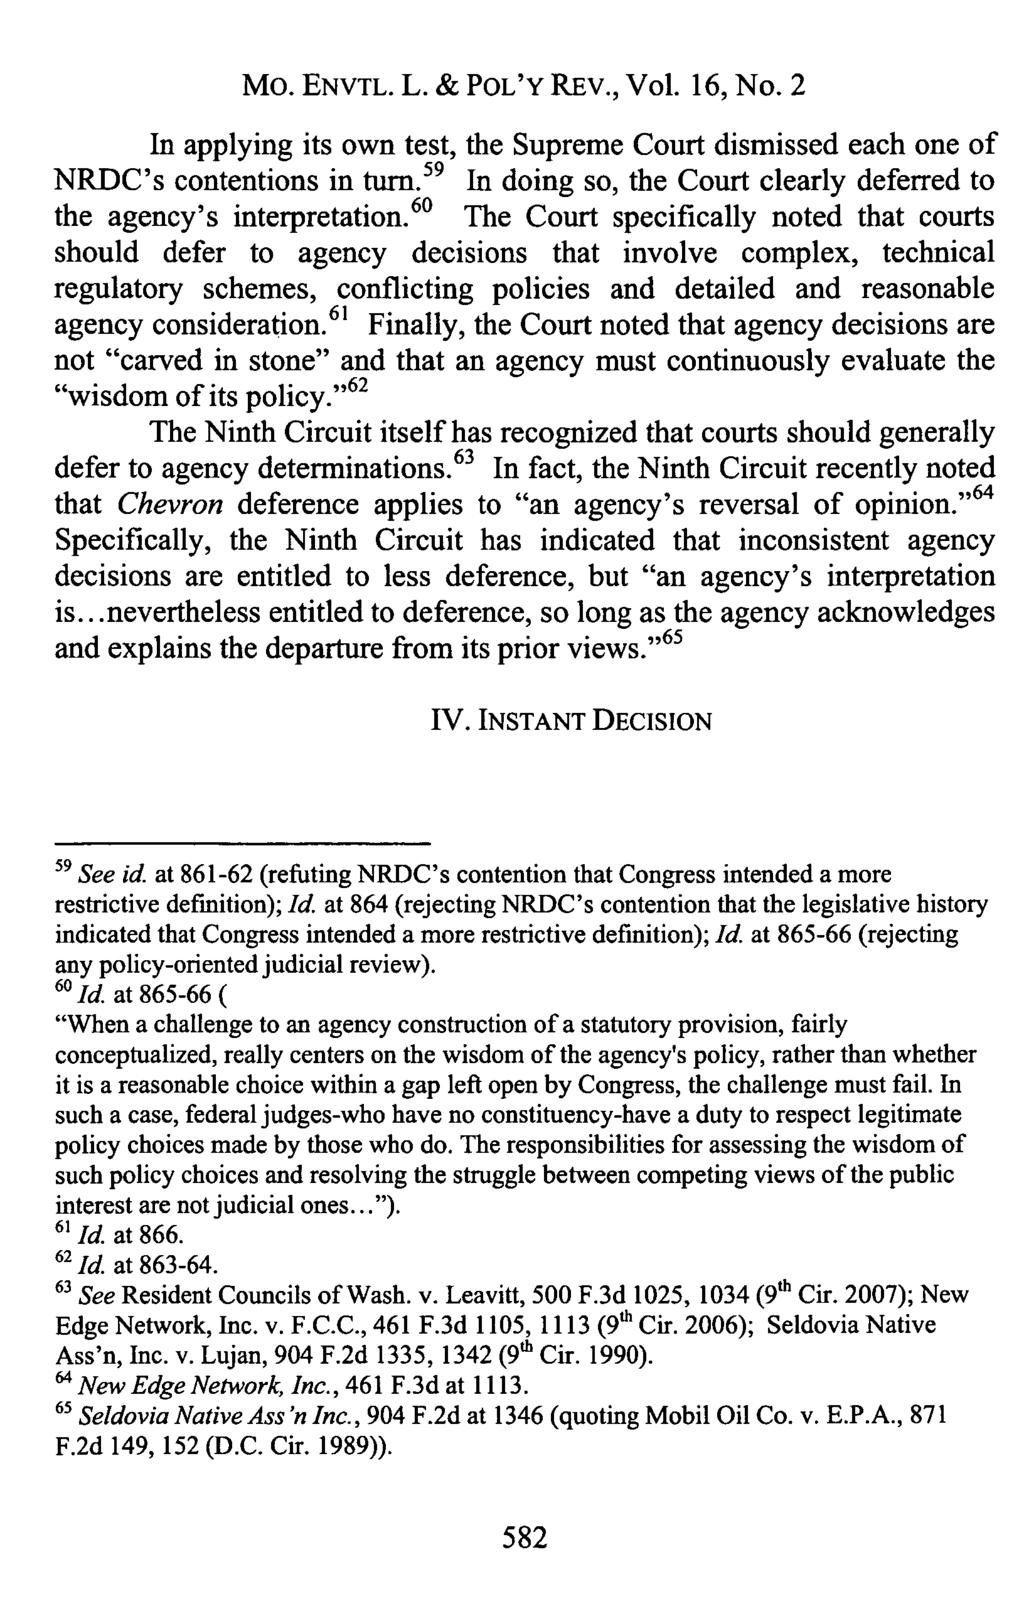 Mo. ENVTL. L. & POL'Y REv., Vol. 16, No. 2 In applying its own test, the Supreme Court dismissed each one of NRDC's contentions in turn.